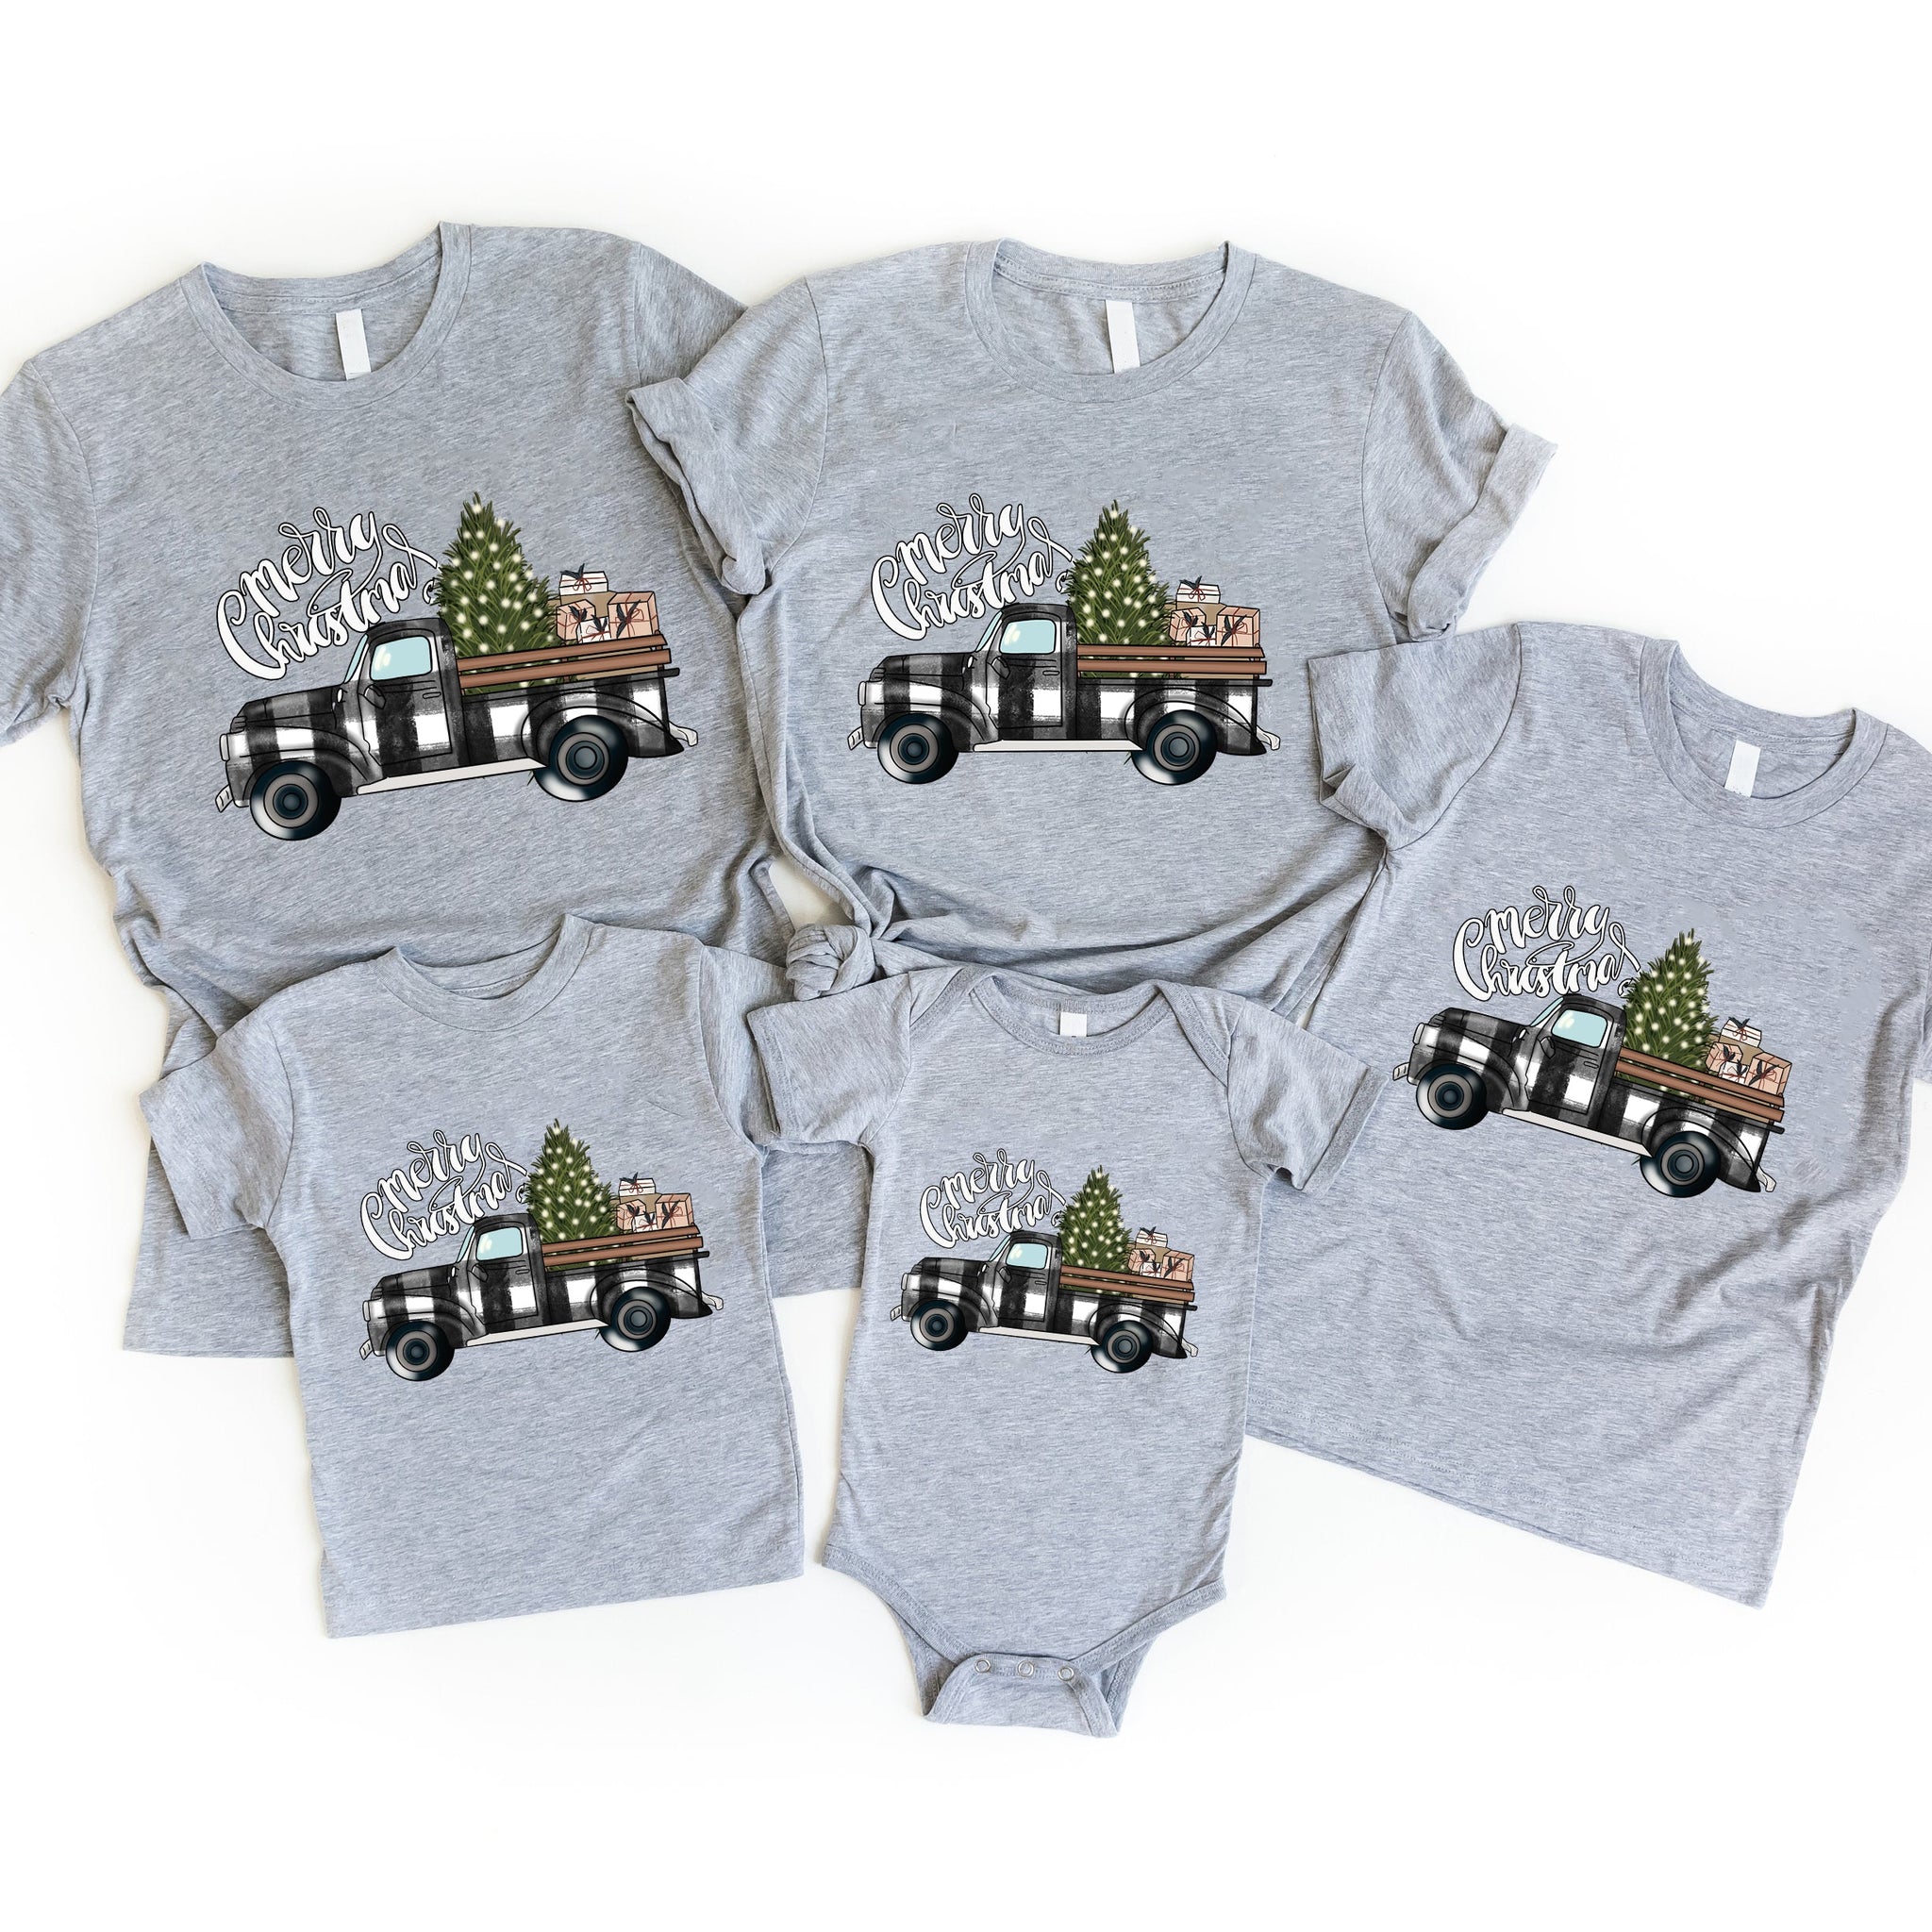 'Merry Chirstmas' White Letter Pattern and ' A Car Of Gift' Pattern Family Christmas Matching Pajamas Tops Cute Gray Short Sleeve T-shirts With Dog Bandana